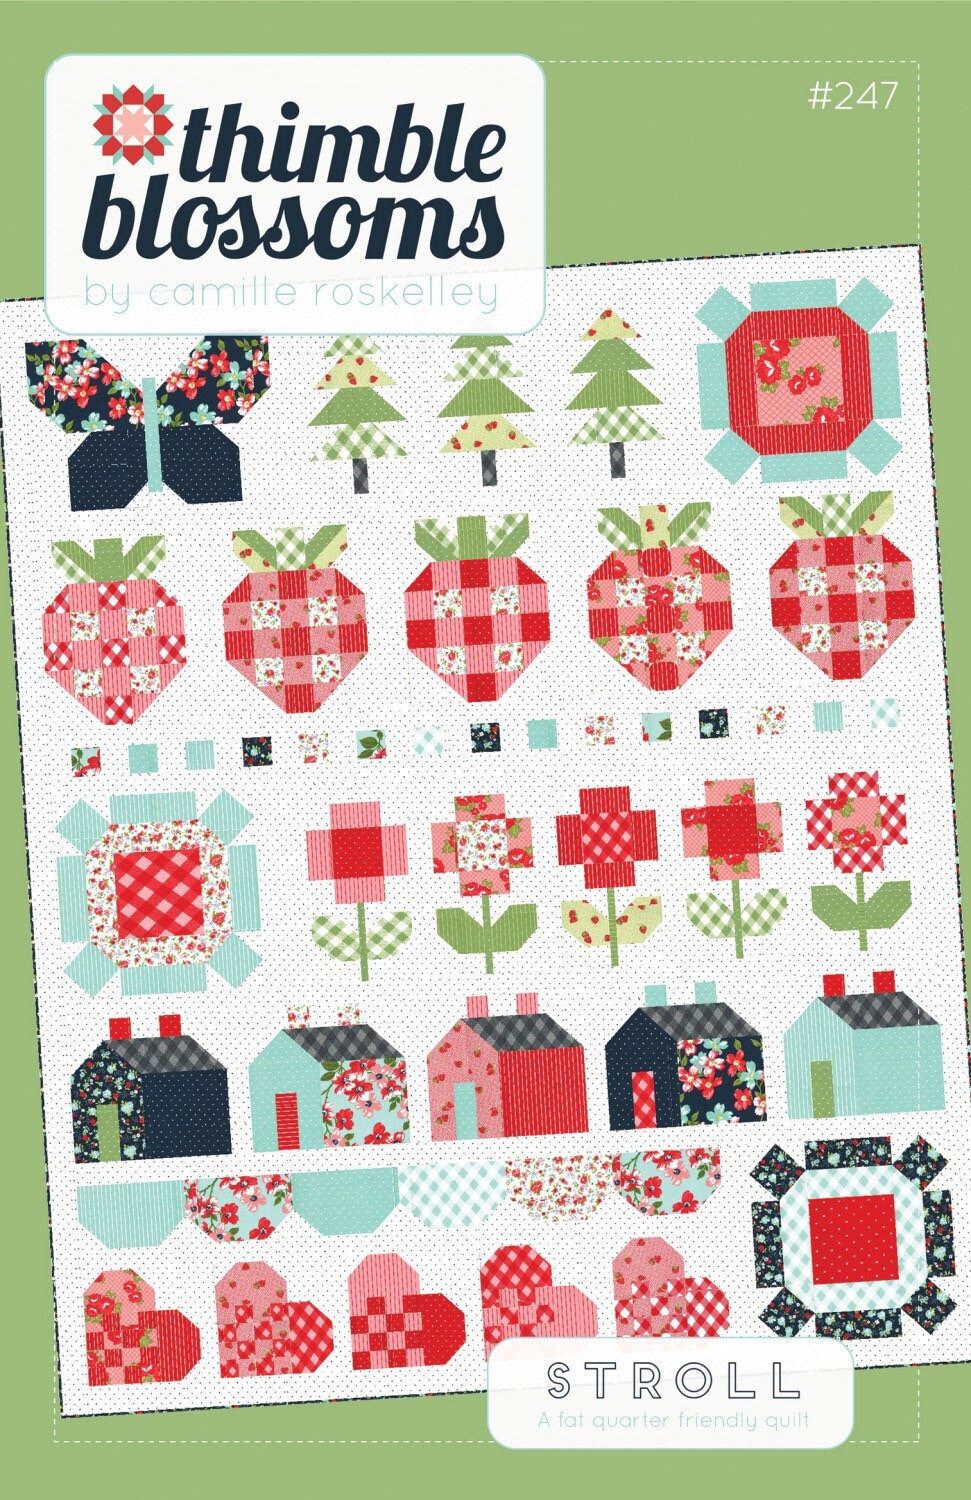 Stroll Quilt Pattern - Thimble Blossoms - Camille Roskelley - Fat Quarter Friendly - 65” x 78”